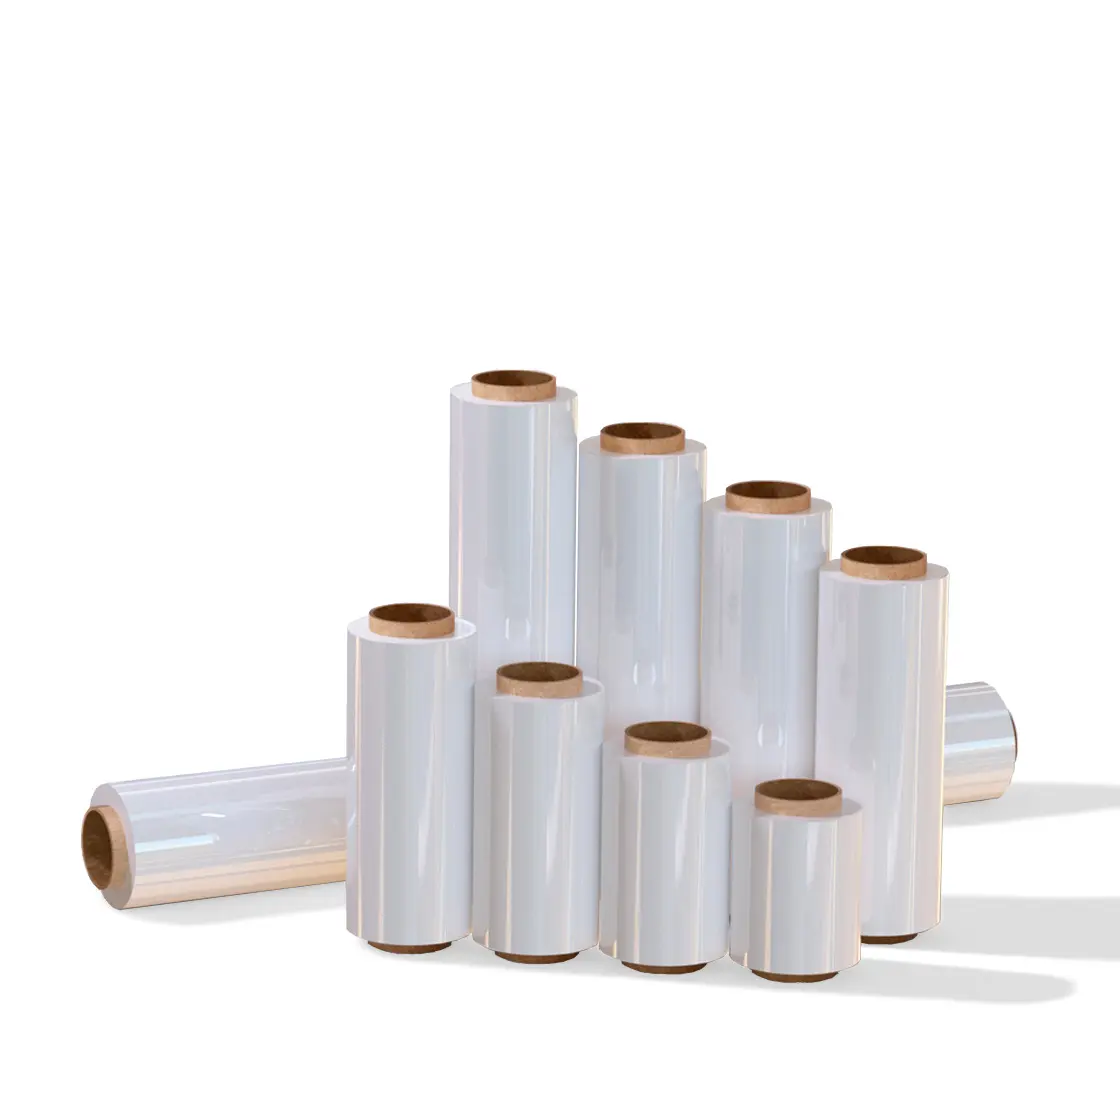 CLEAR CELLOPHANE PAPER ROLLSFOR PACKING CLEAR WRAPPING 25UM STRETCH FILM